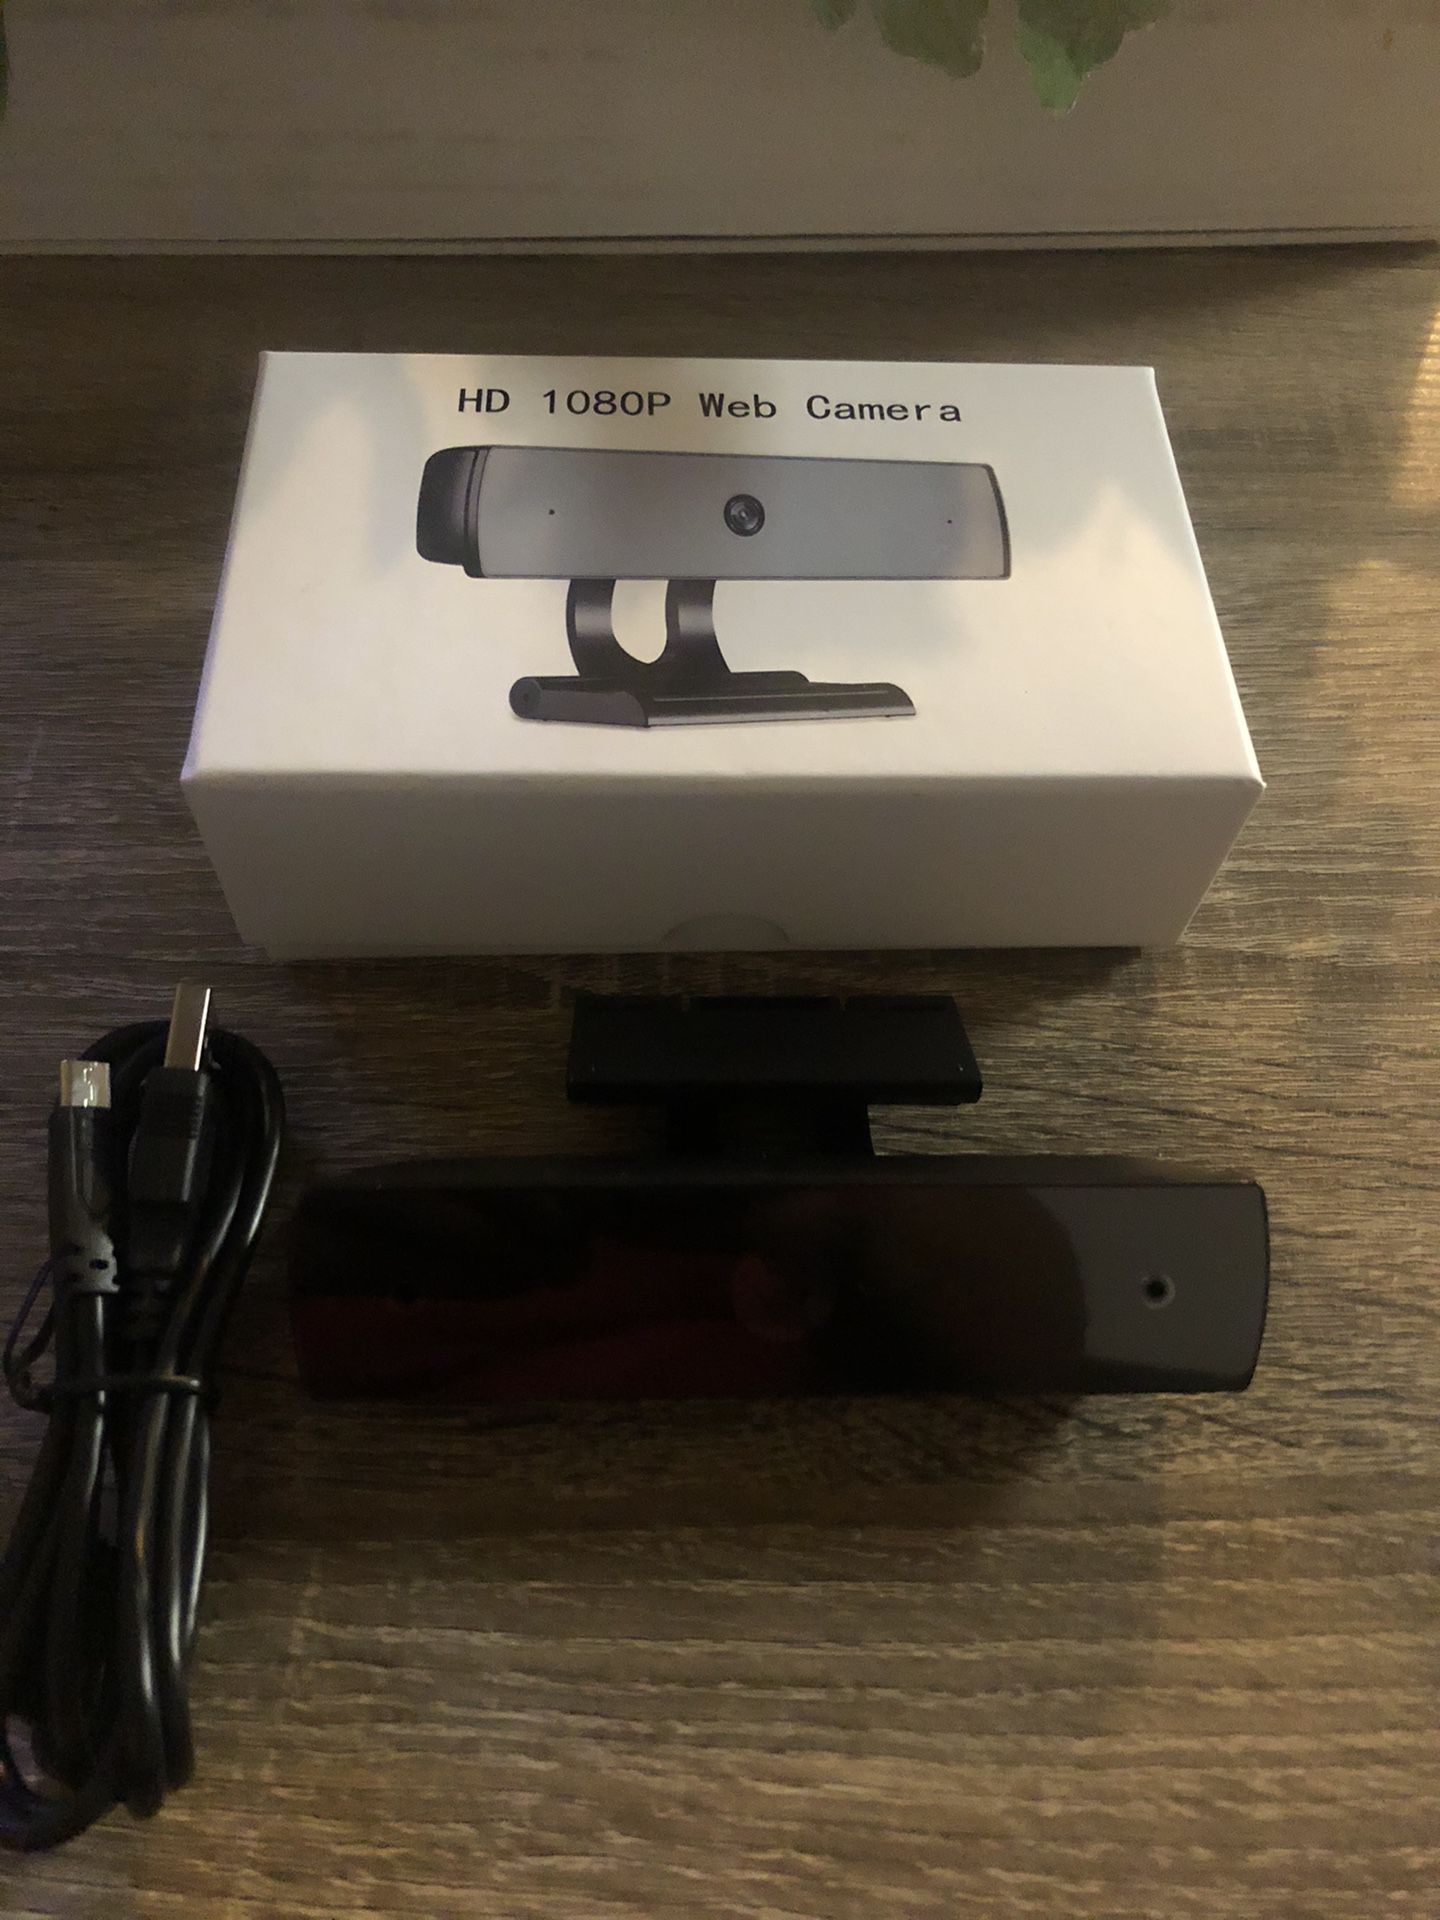 Webcam with Microphone HD 1080P for video conferencing, gaming, online classes etc